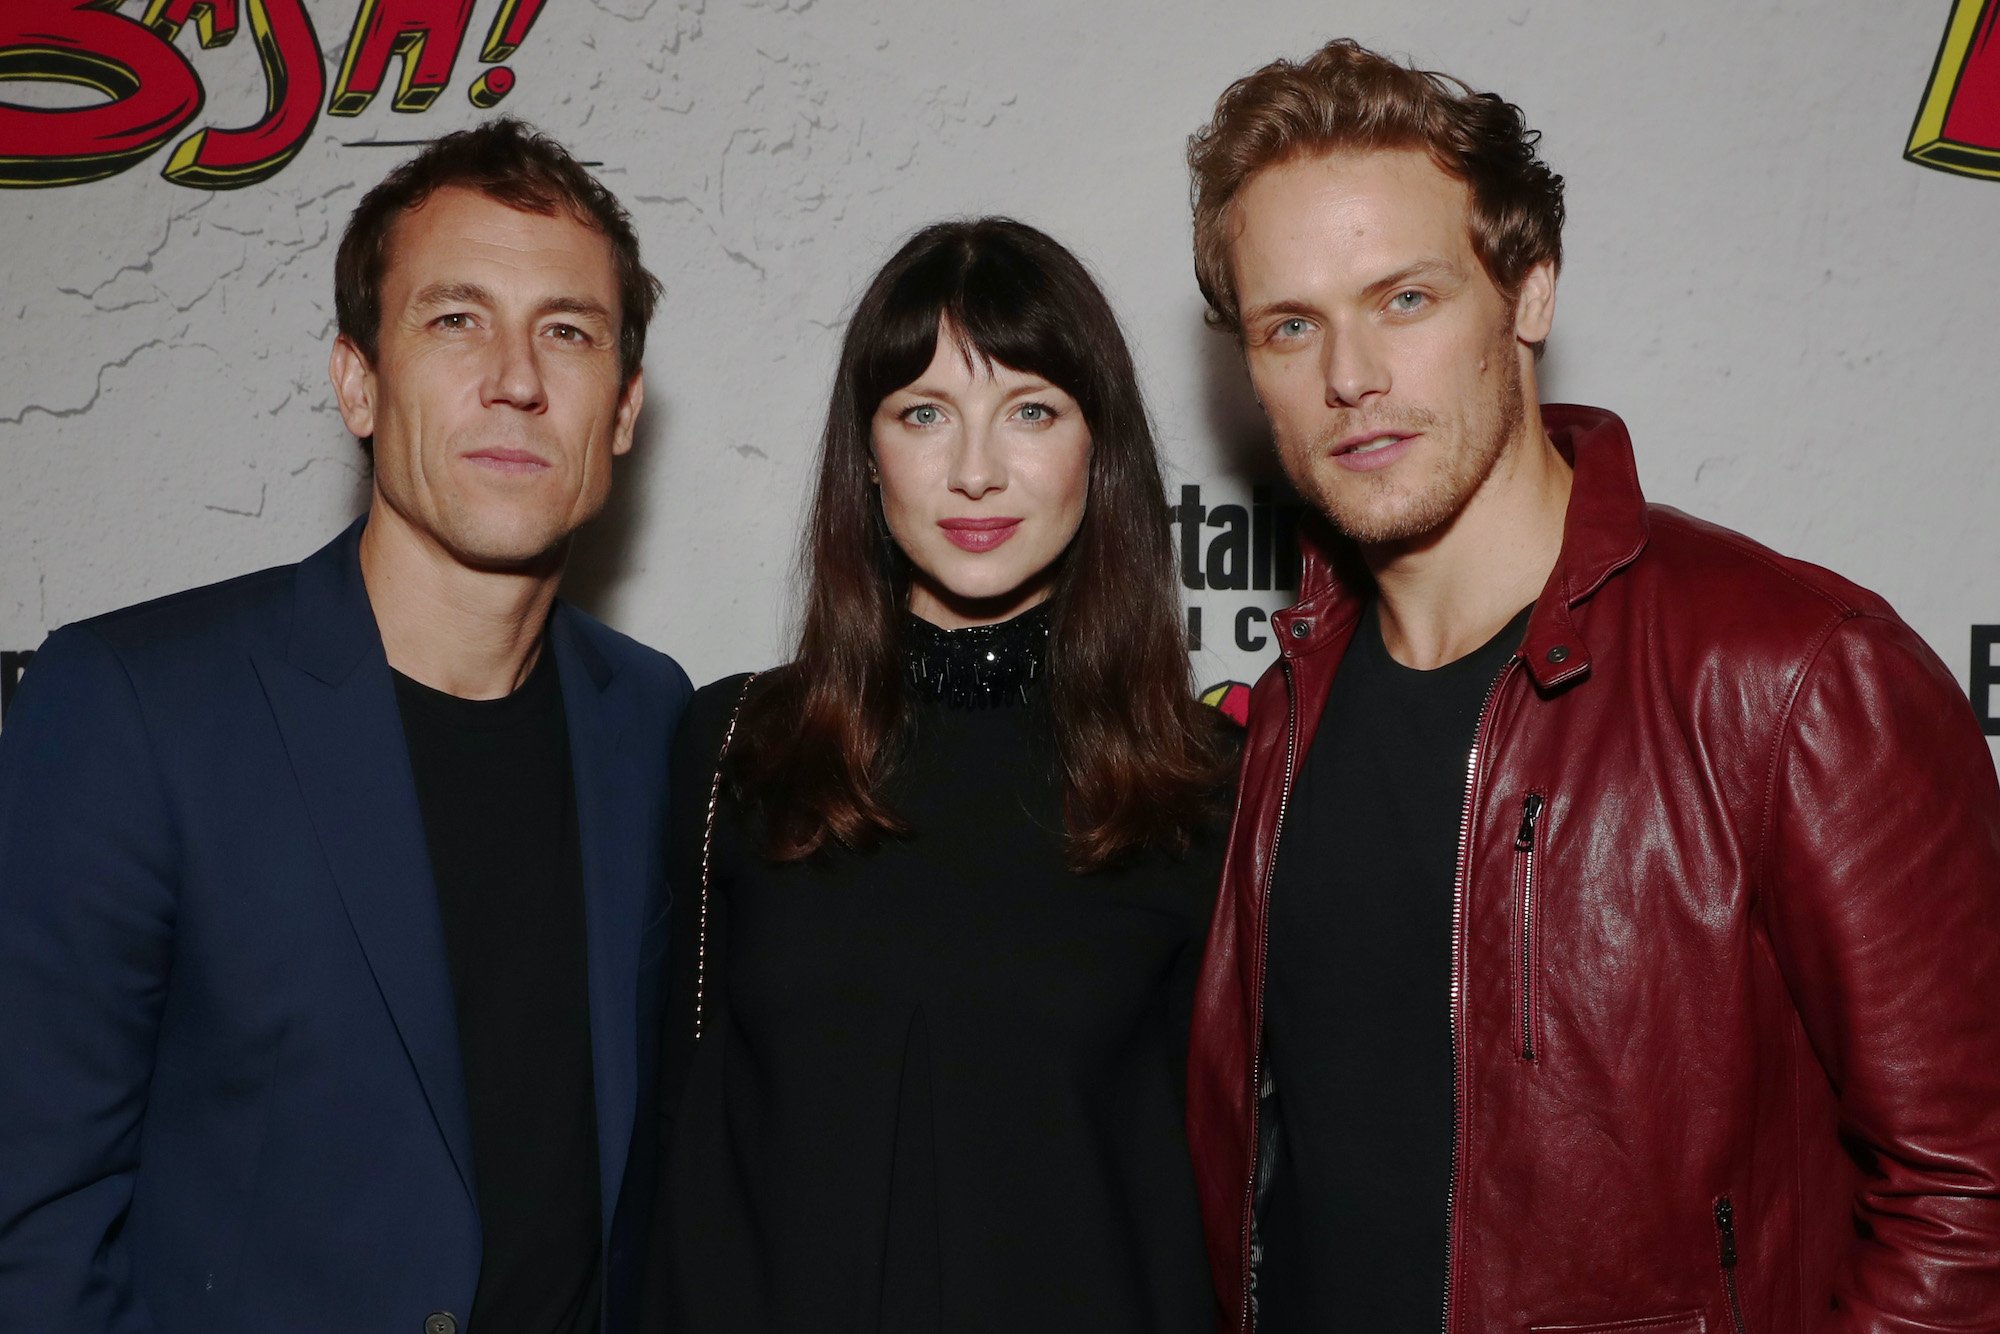 'Outlander' stars Tobias Menzies, Caitriona Balfe, and Sam Heughan pose at Comic-Con 2017 in San Diego in front of a white backdrop with red and yellow lettering. Menzies wears a black shirt and navy blue suit jacket. Balfe wears a black dress. Heughan wears a black shirt and red leather jacket. Heughan and Menzies shared many scenes in 'Outlander' as Jamie Fraser and Jack Randall. Menzies won an Emmy at the 2021 Emmy Awards on Sept. 19, and Heughan's reaction to Menzie's Emmy win was so supportive.